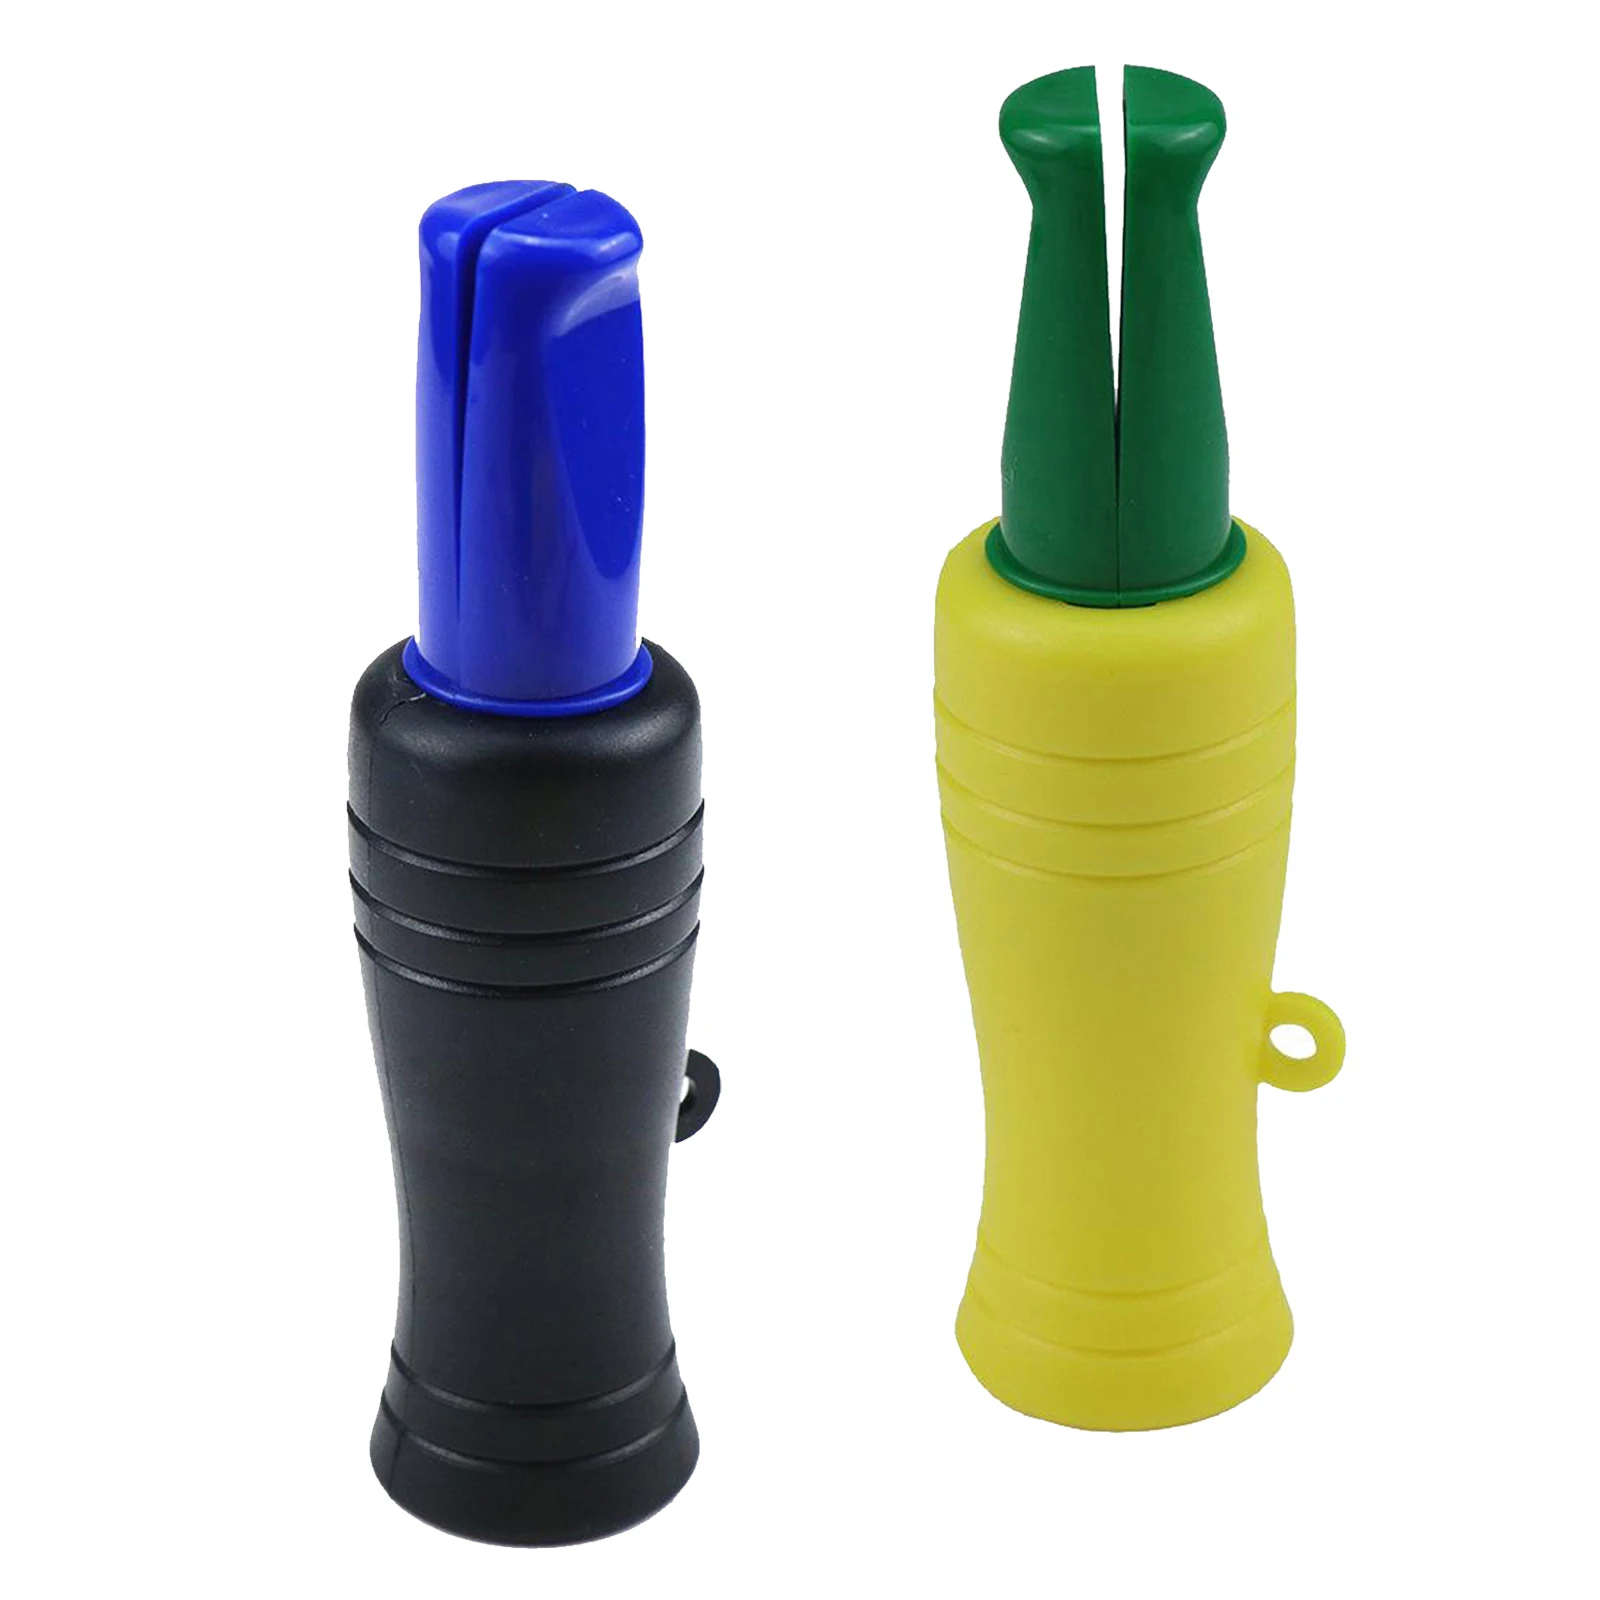 NE_ Duck Call Decoy Caller Whistle Rook Callers Outdoor Hunting Sound Hunter Sur 